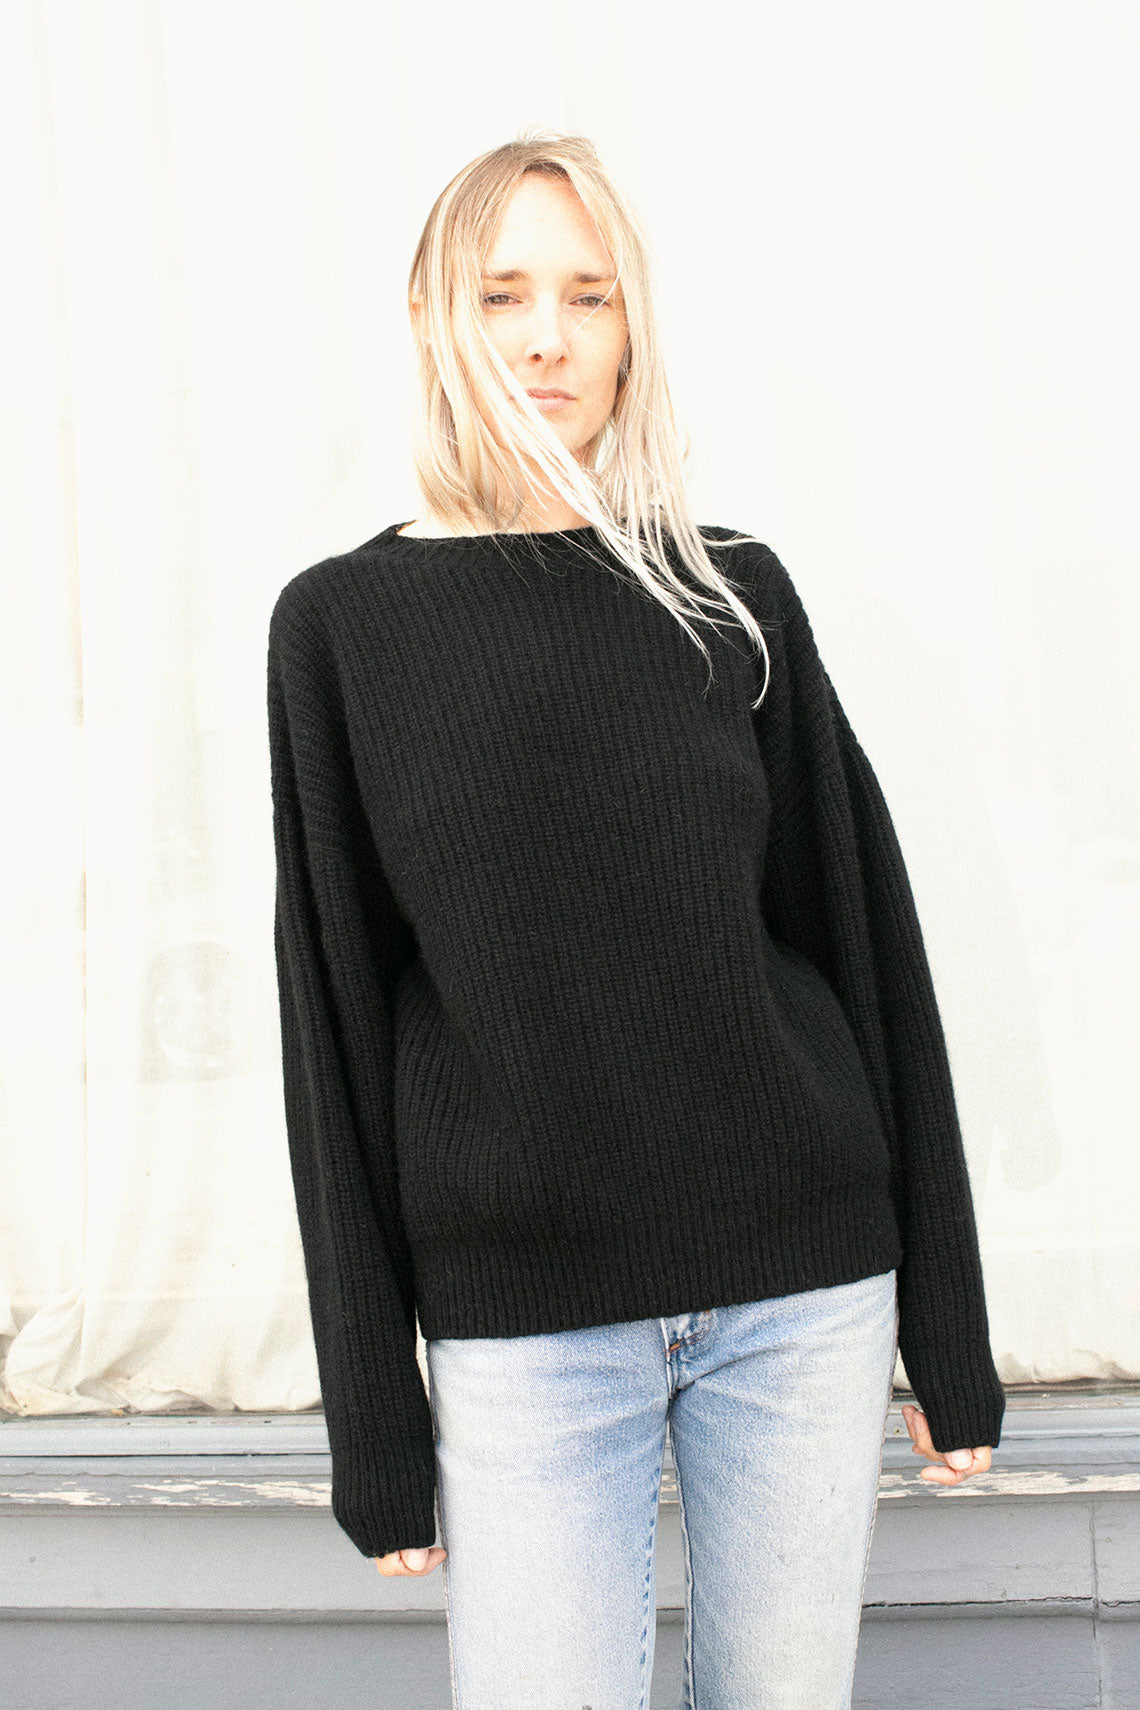 Black Recycled Wool Mea Pullover